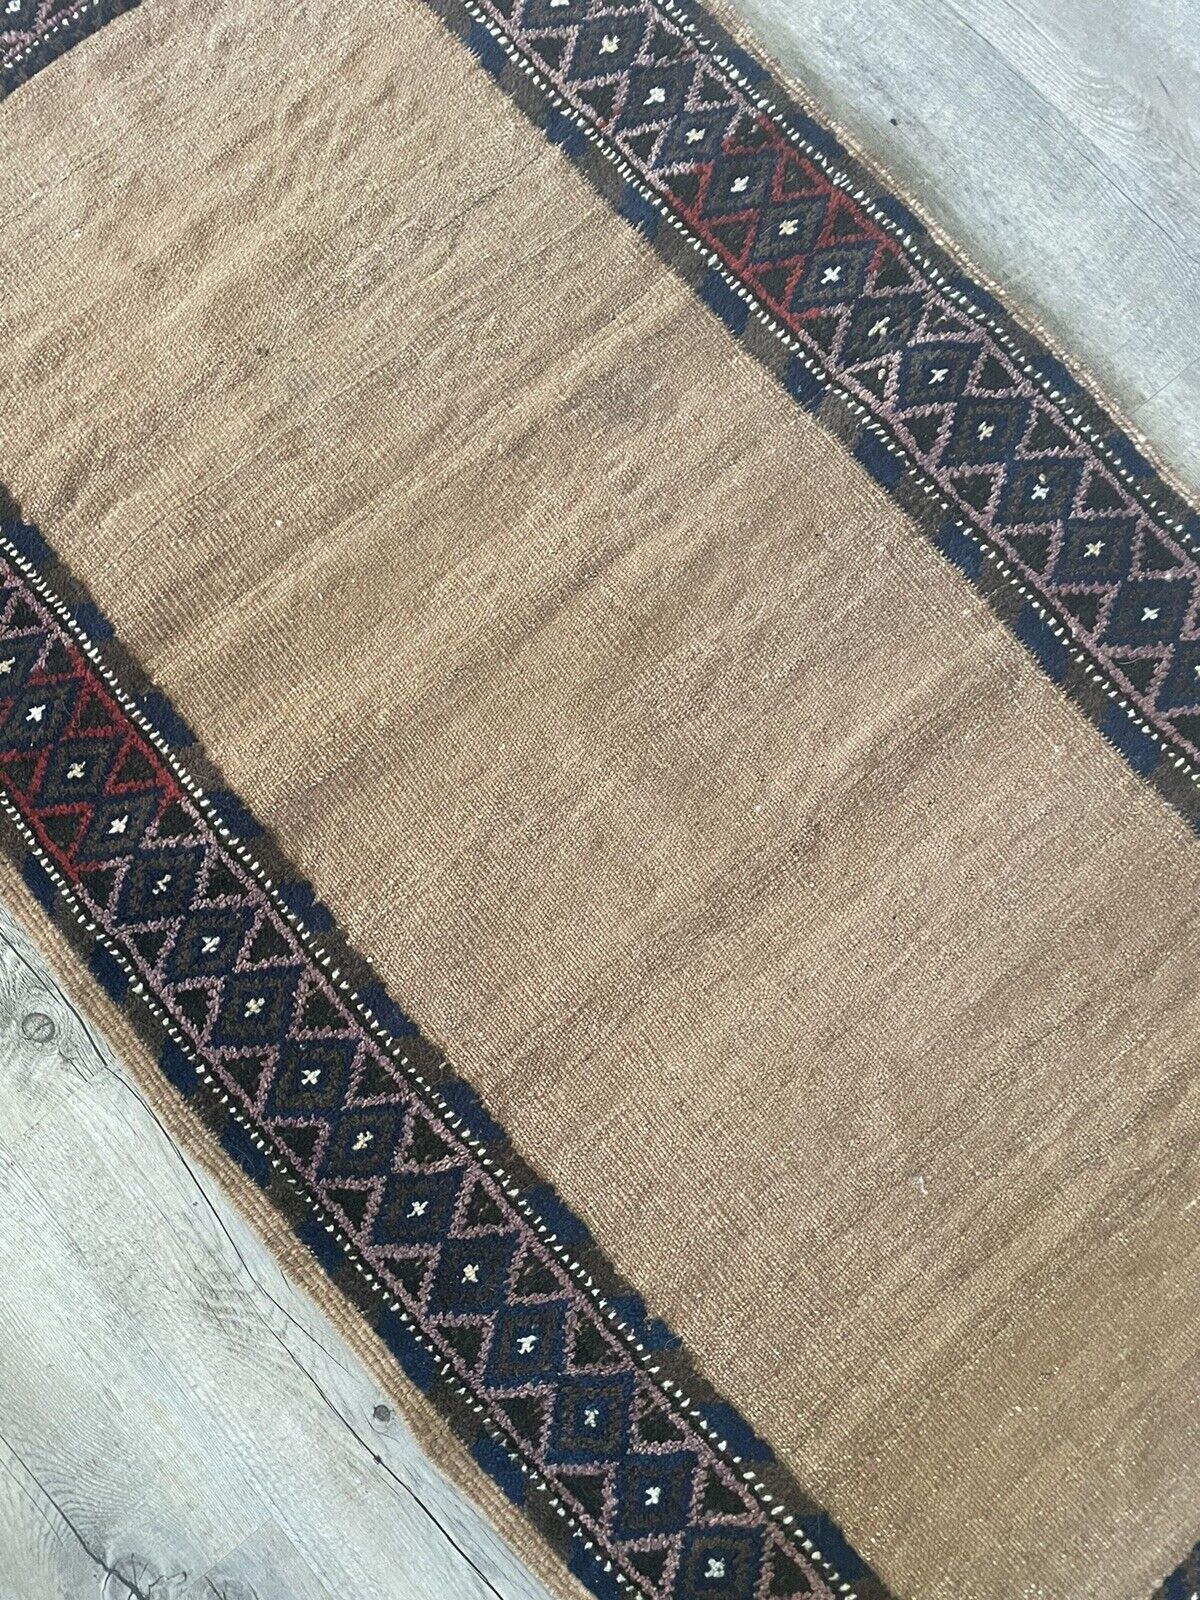 Close-up of geometric patterns on Handmade Antique Afghan Baluch Collectible Rug - Detailed view showcasing the intricate geometric patterns adorning the sides of the rug, created through pile weaving.